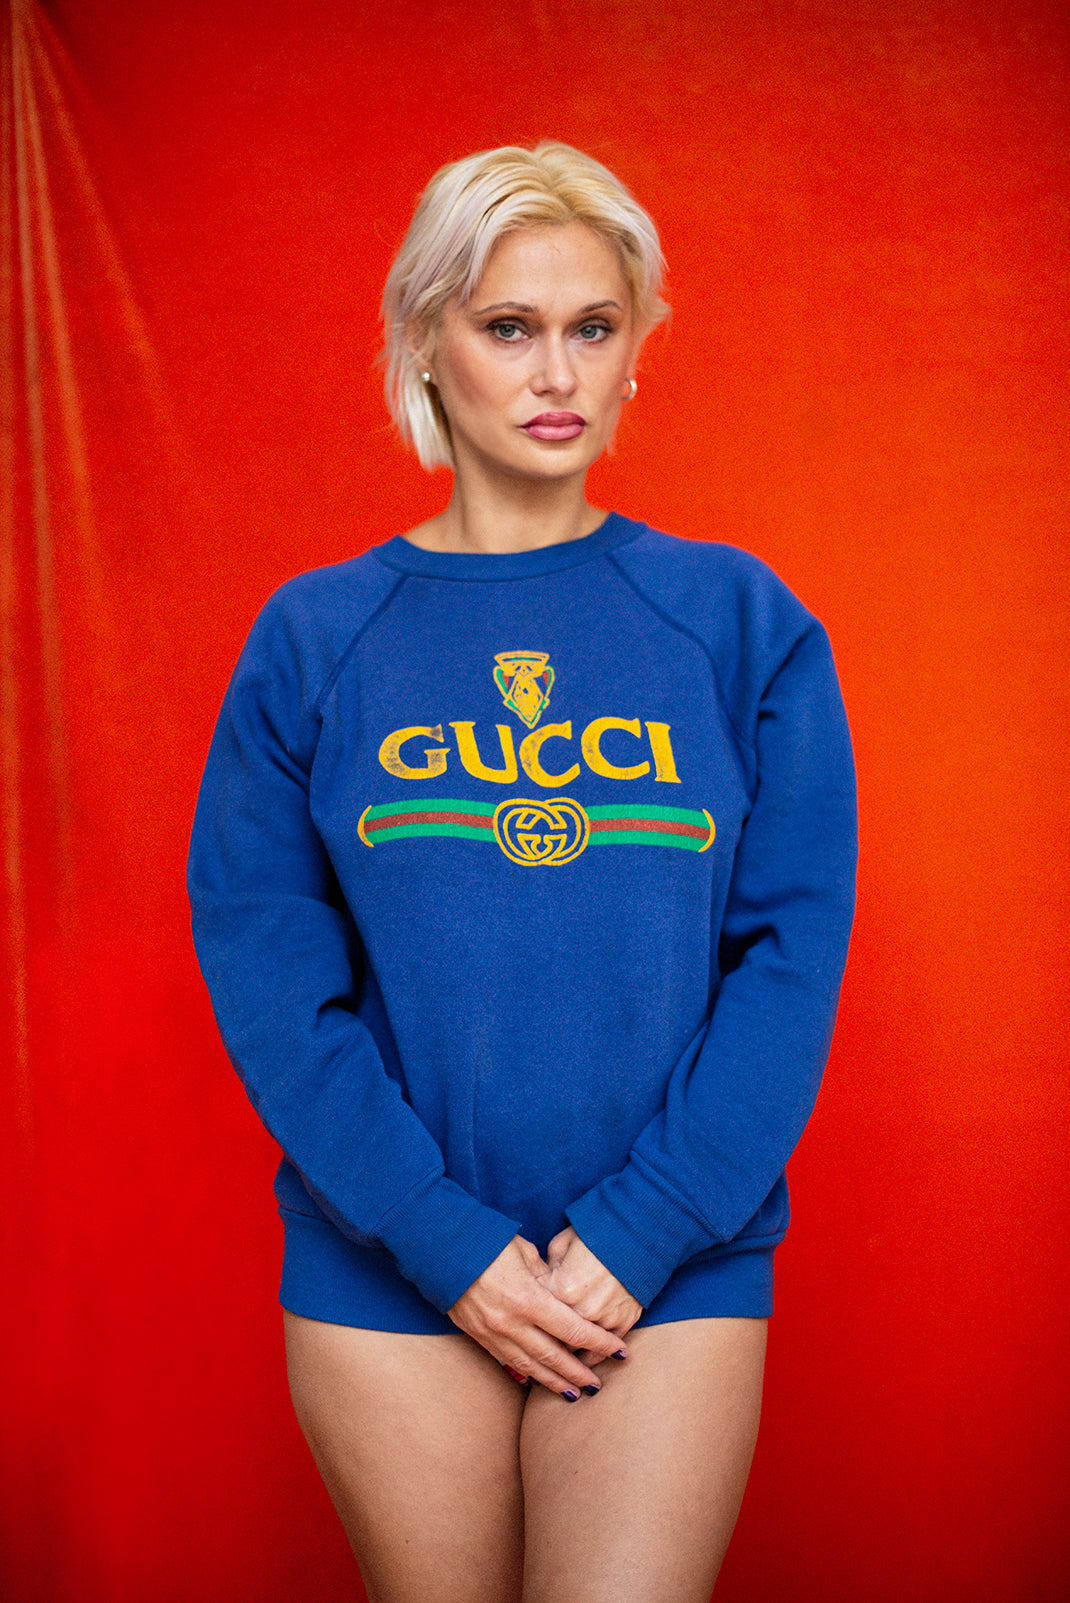 GUCCI bootleg from 80s